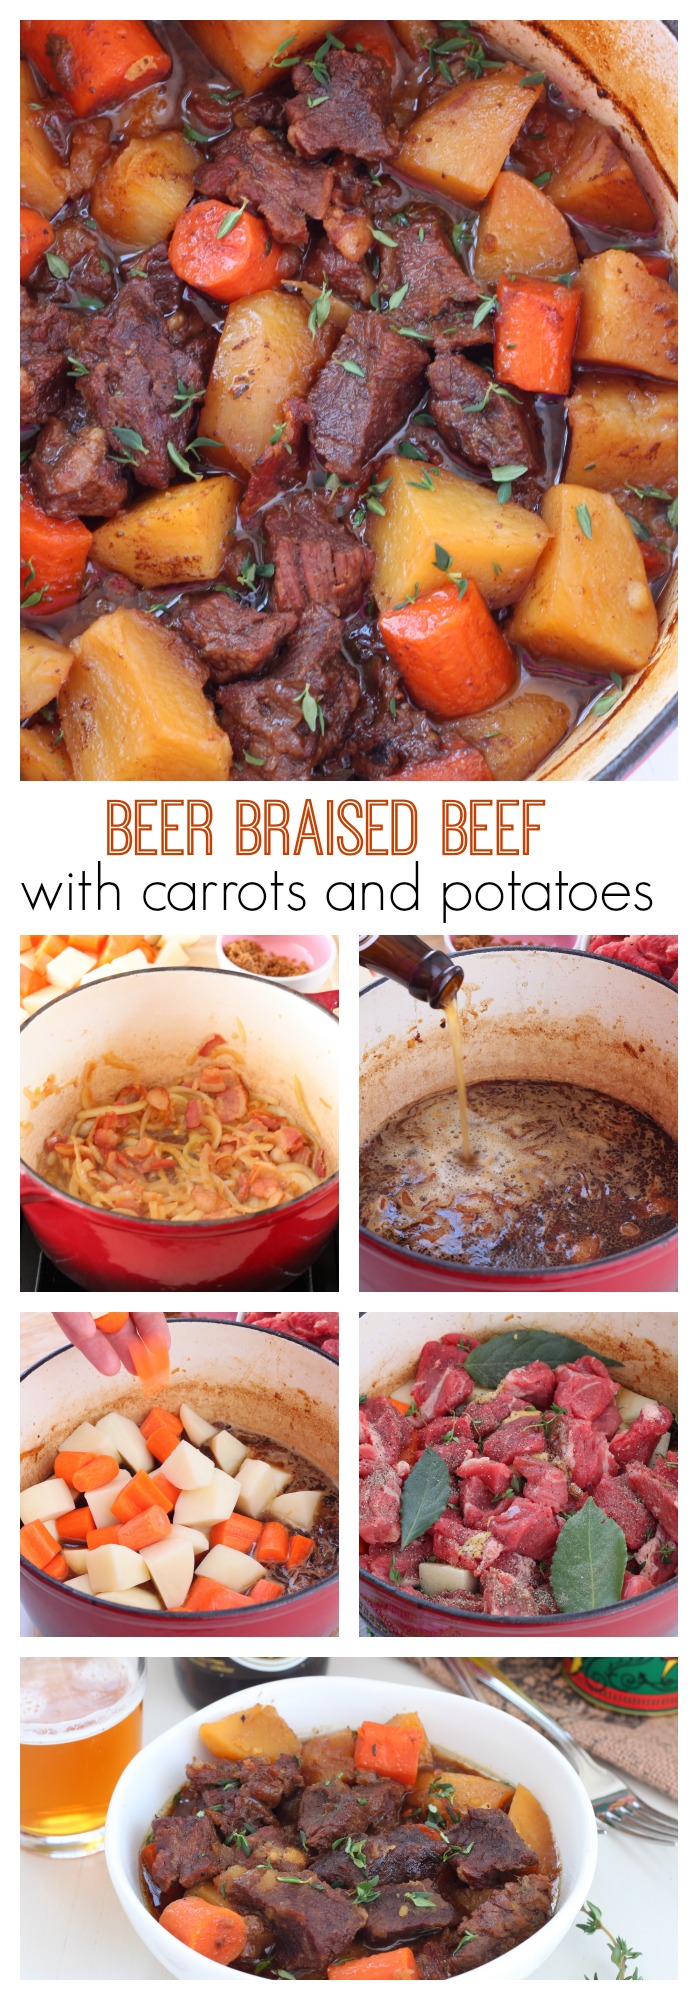 Flavorful beer braised beef with carrots and potatoes, cooked slow and low in the oven is an effortless weeknight meal. One bite of this tender, juicy, tad spicy beef is going to send you over the moon. 